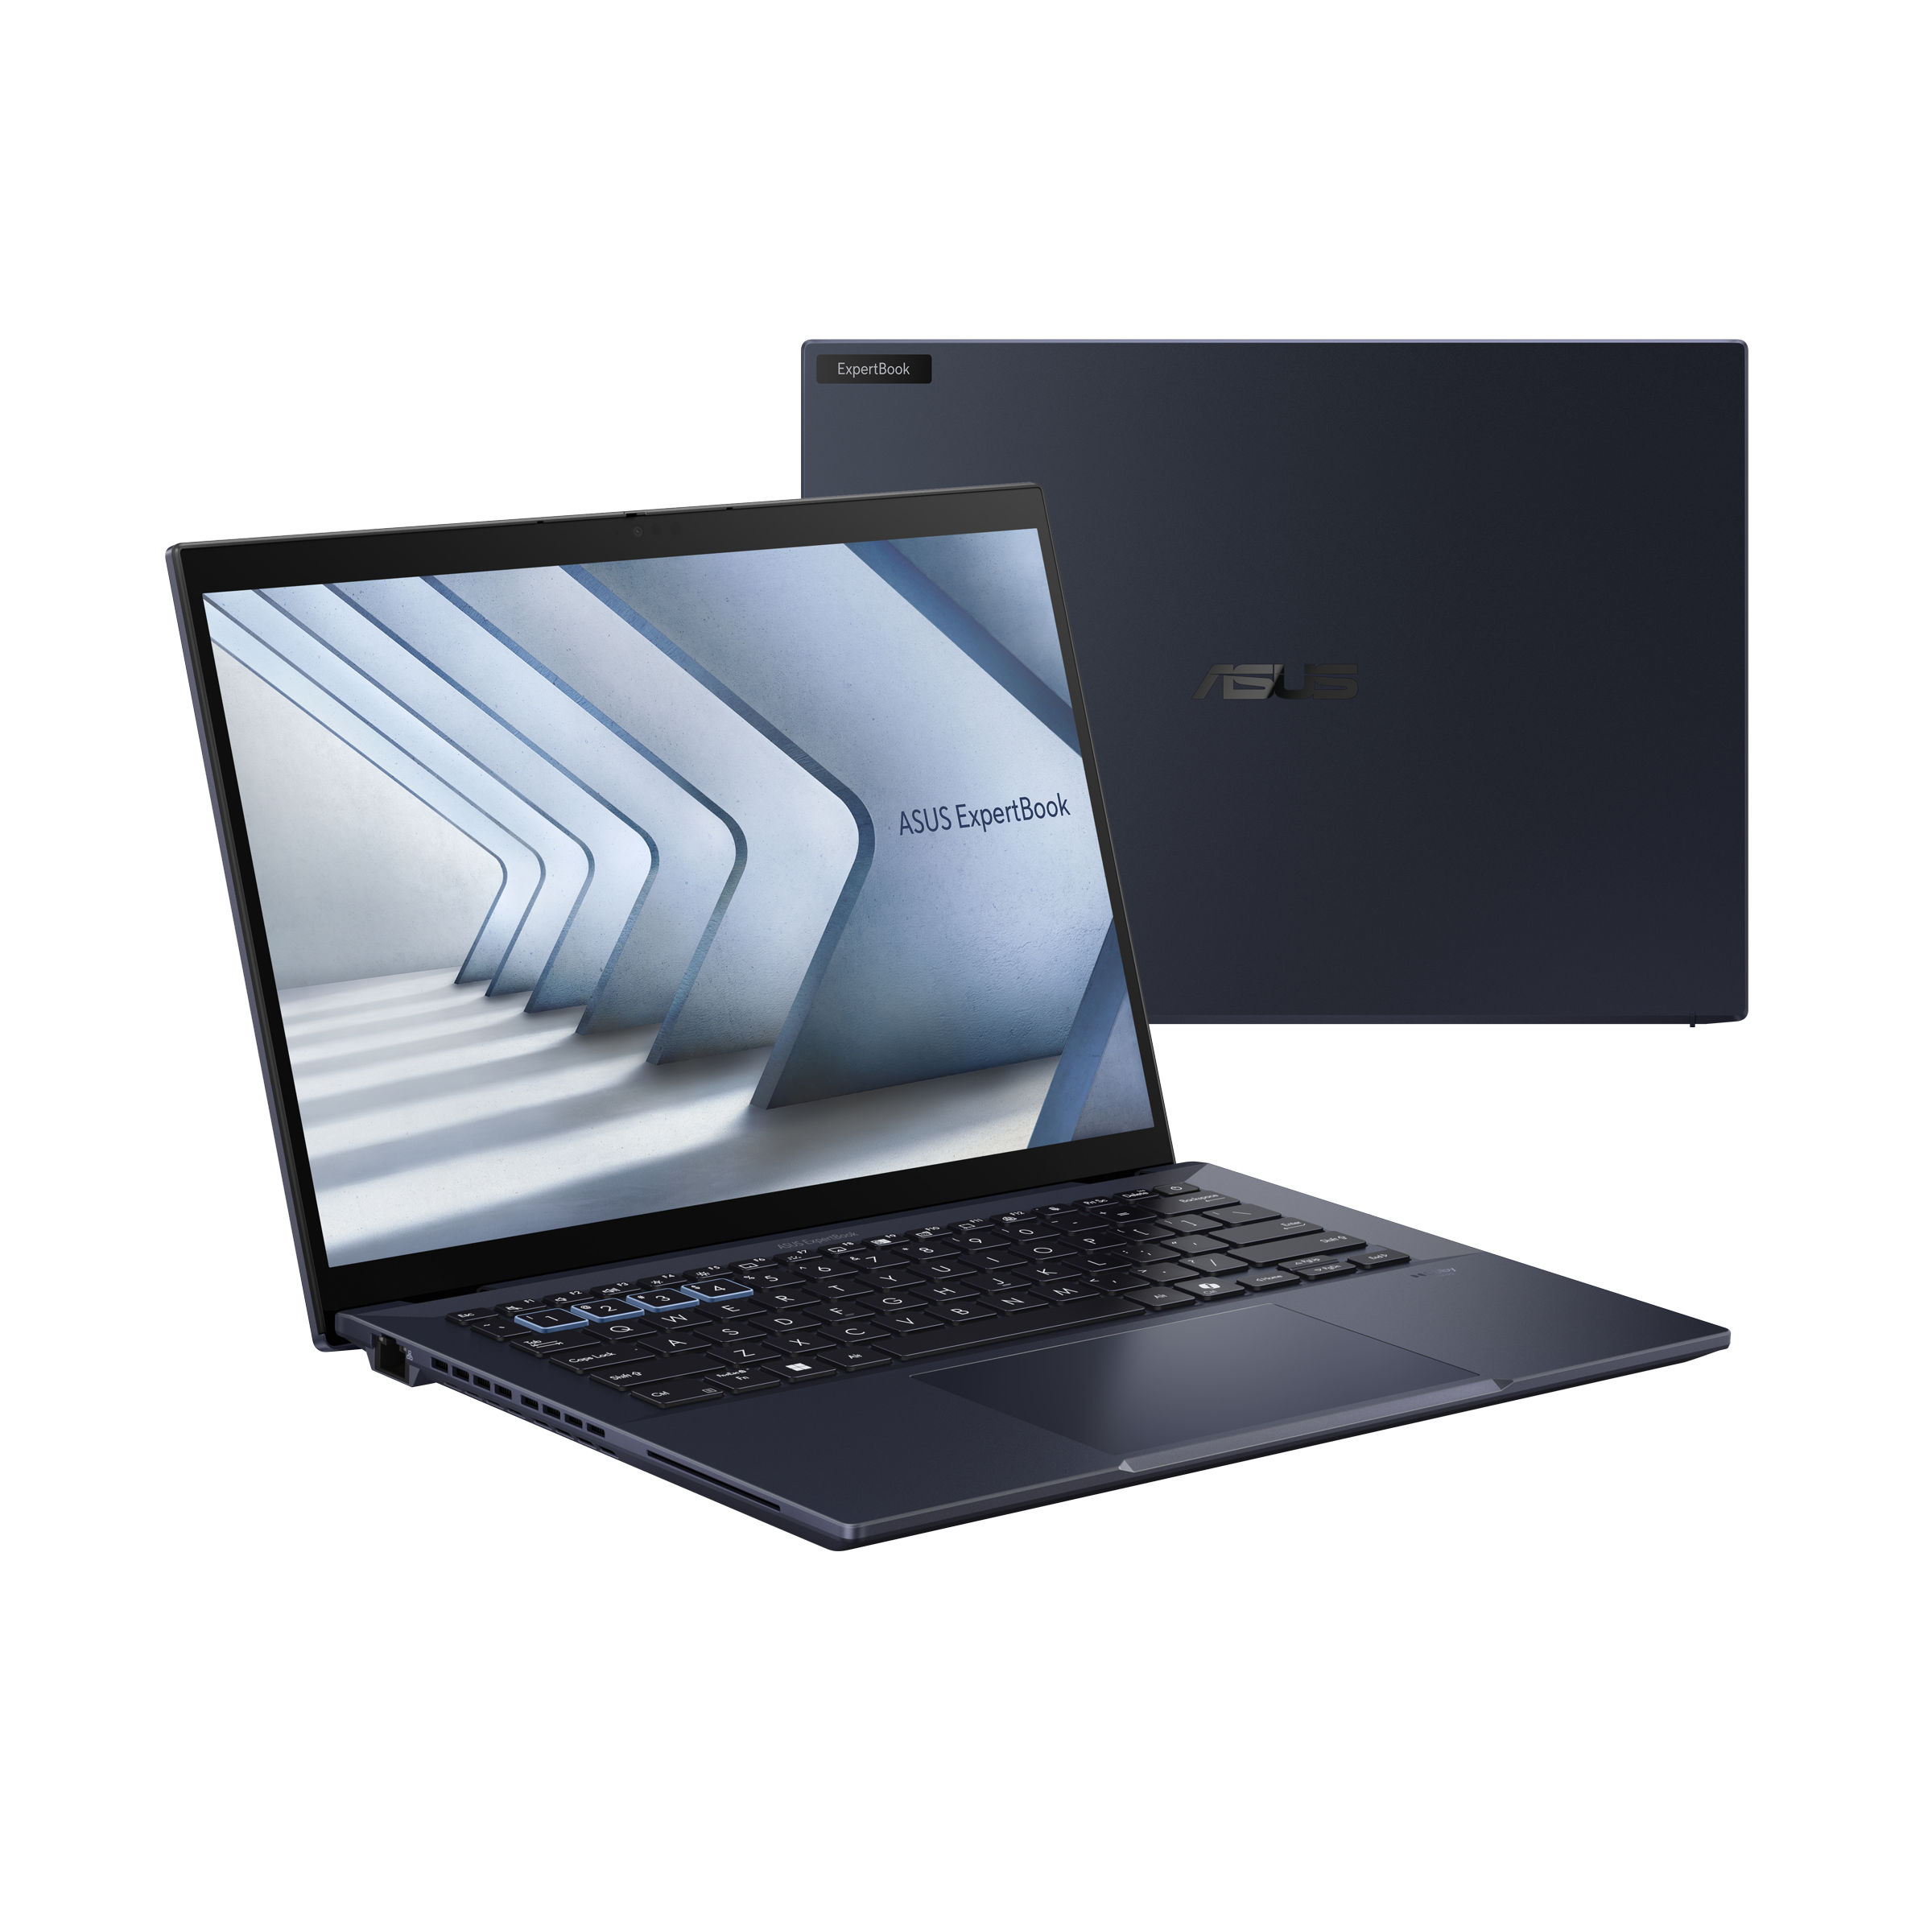 ExpertBook B5 (B5404)｜Laptops For Work｜ASUS USA